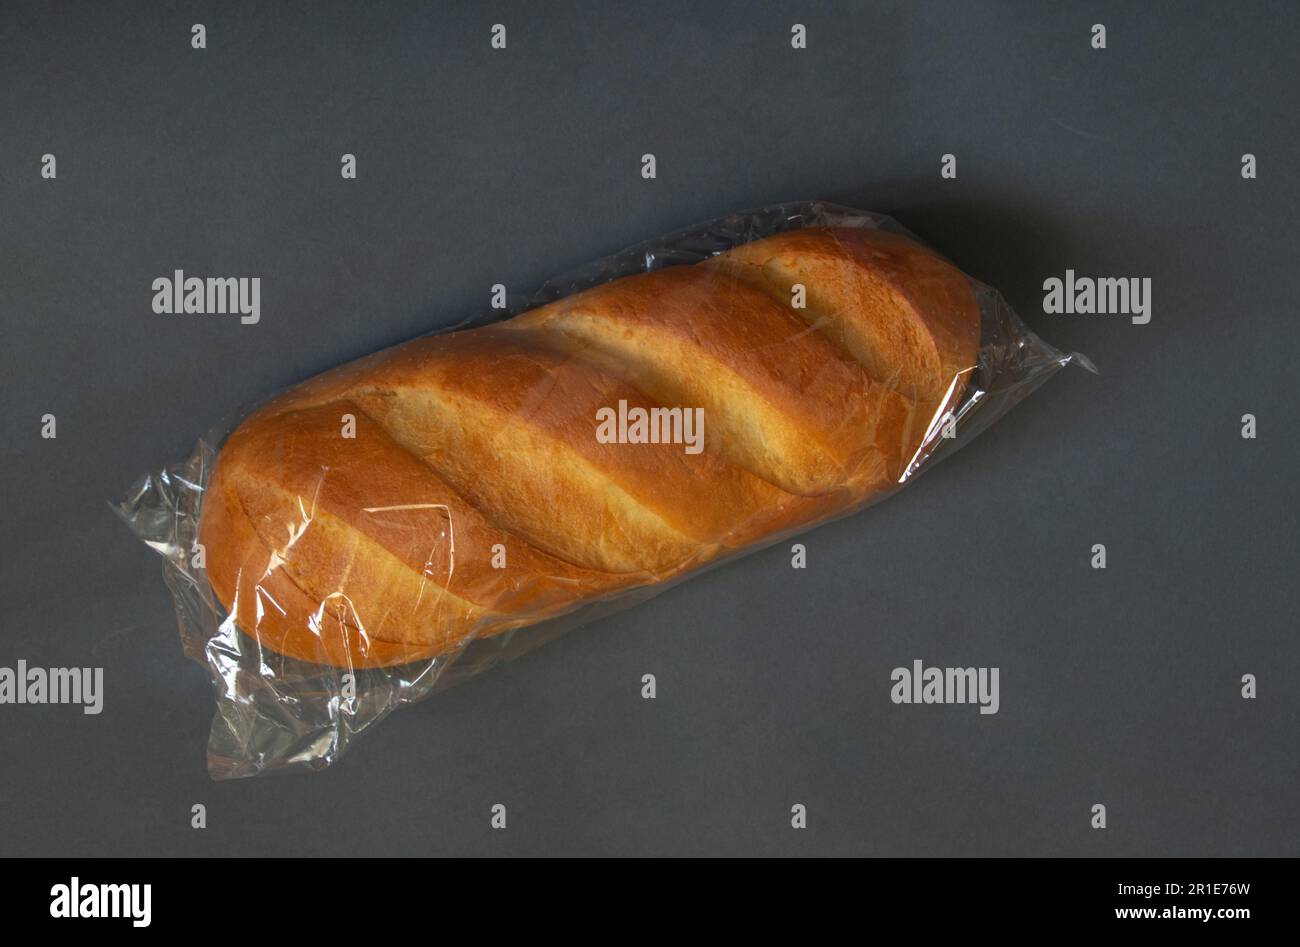 loaf of white bread in packaging on a dark isolated background close-up Stock Photo